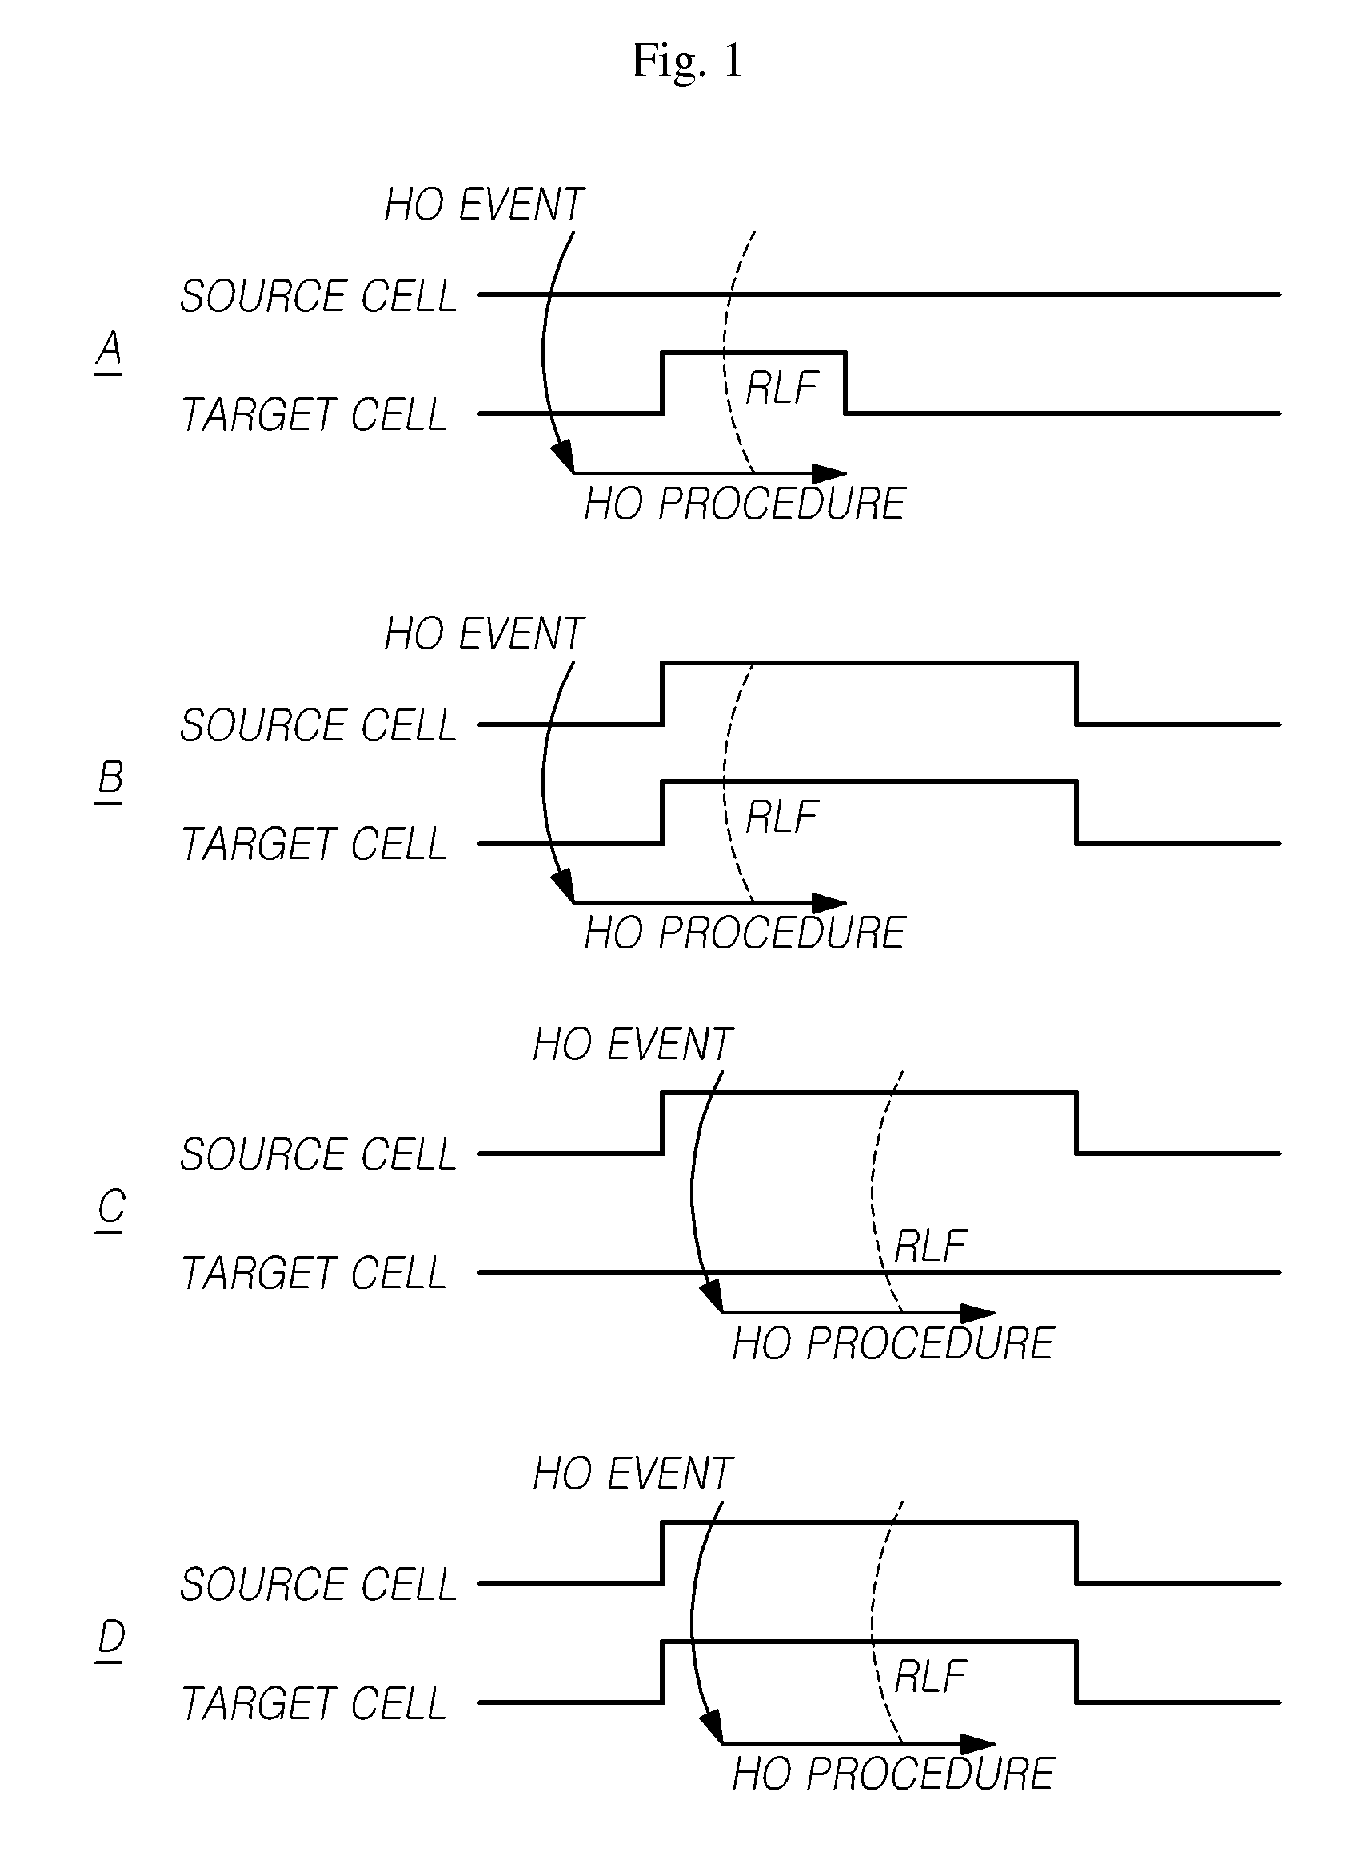 Handover apparatus and method for avoiding in-device coexistence interference